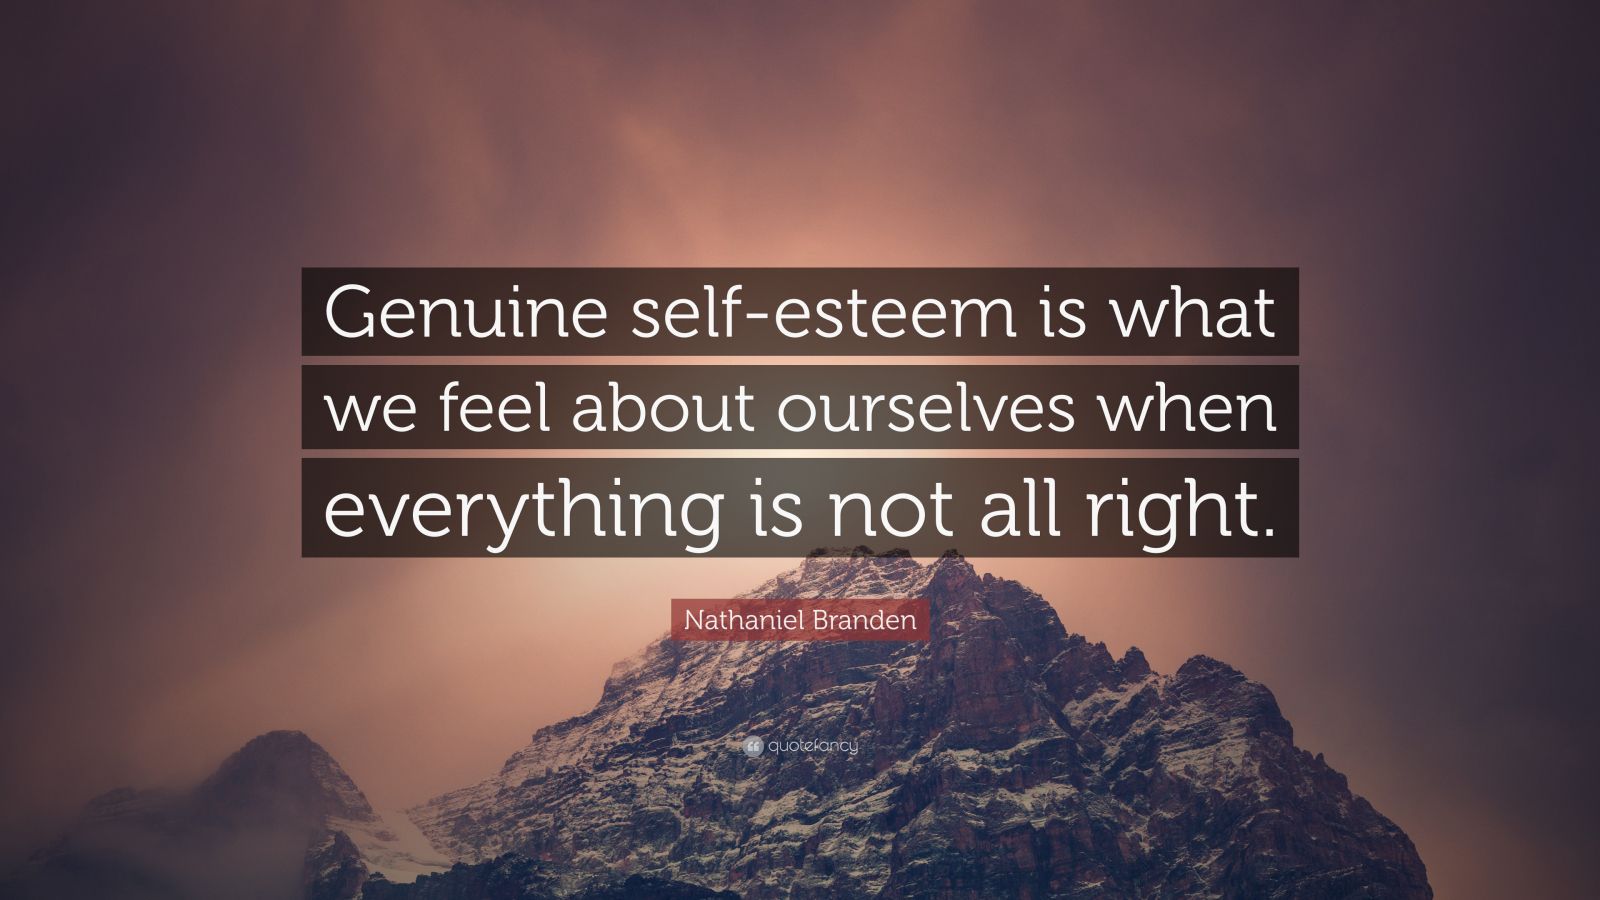 Nathaniel Branden Quote: “Genuine self-esteem is what we feel about ...